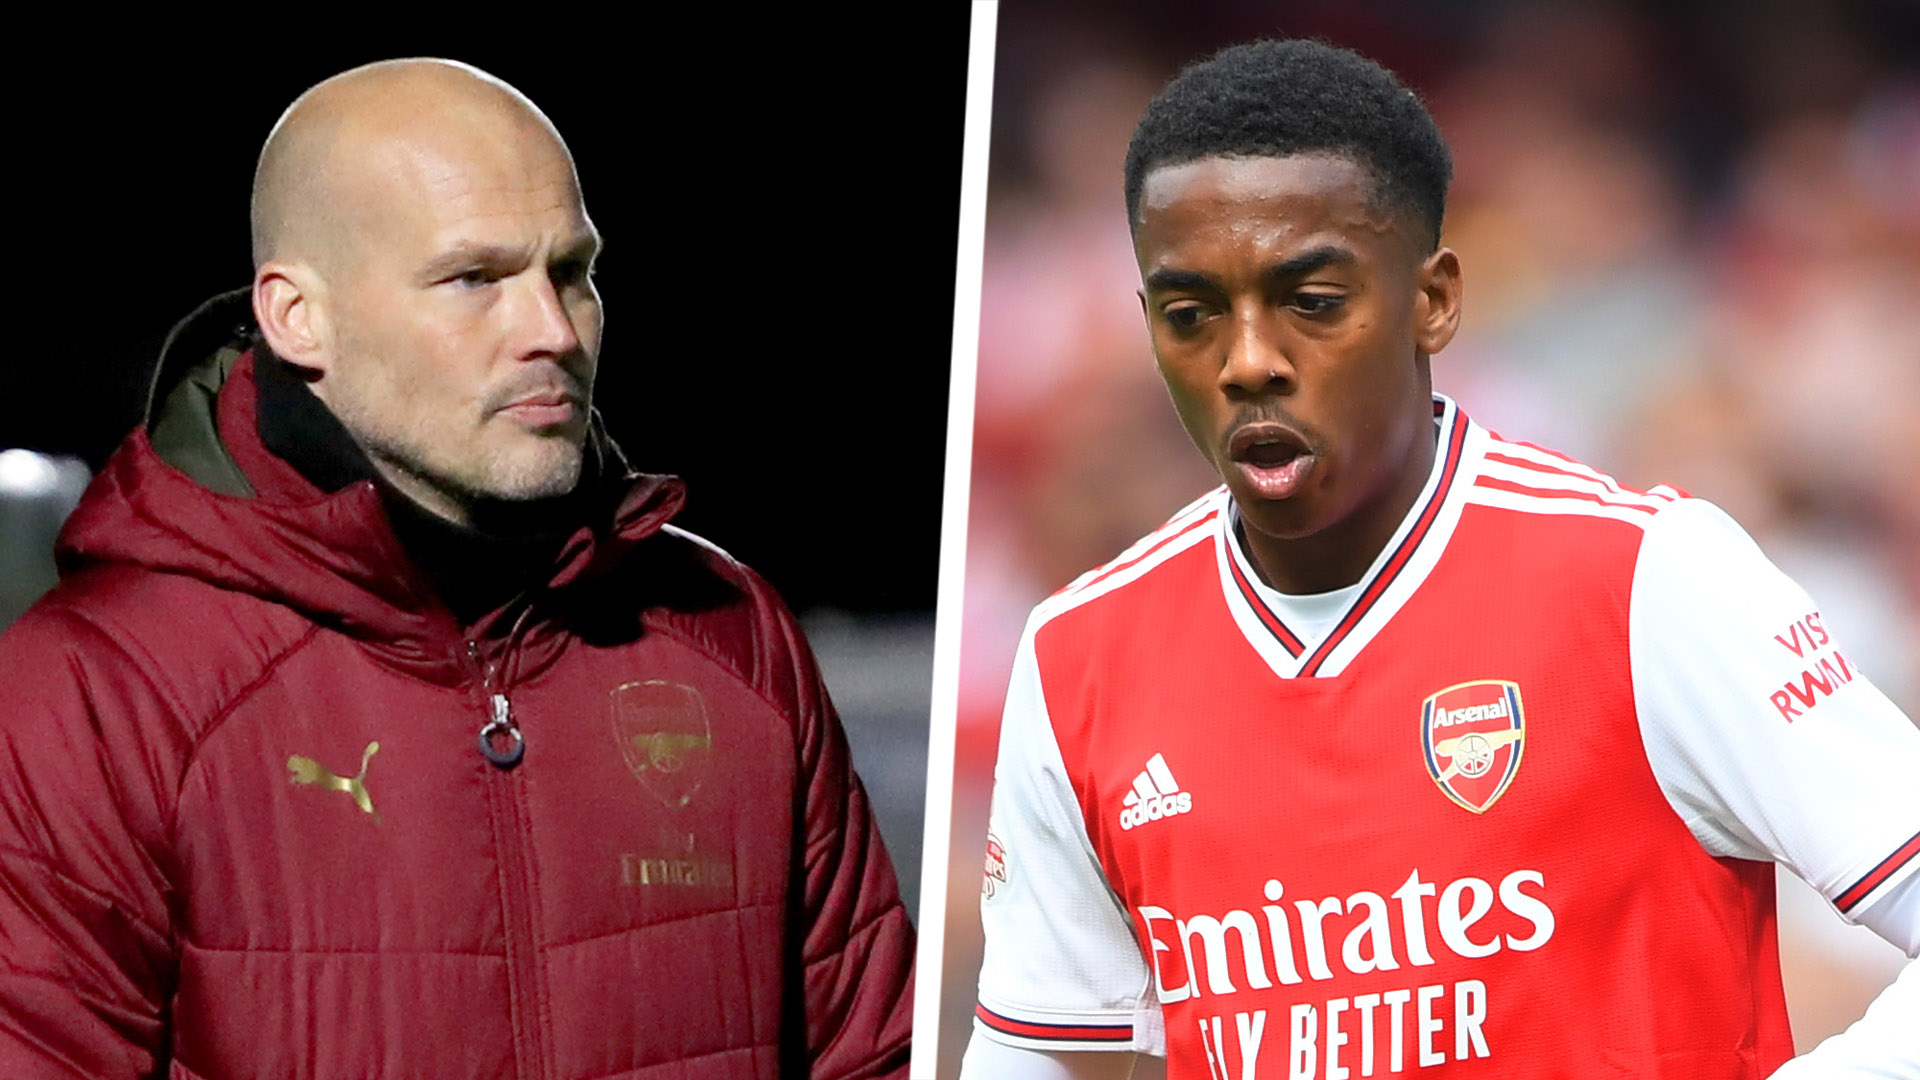 Arsenal news: 'He's a mentor for me' - Joe Willock hails Freddie Ljungberg after dream ...1920 x 1080